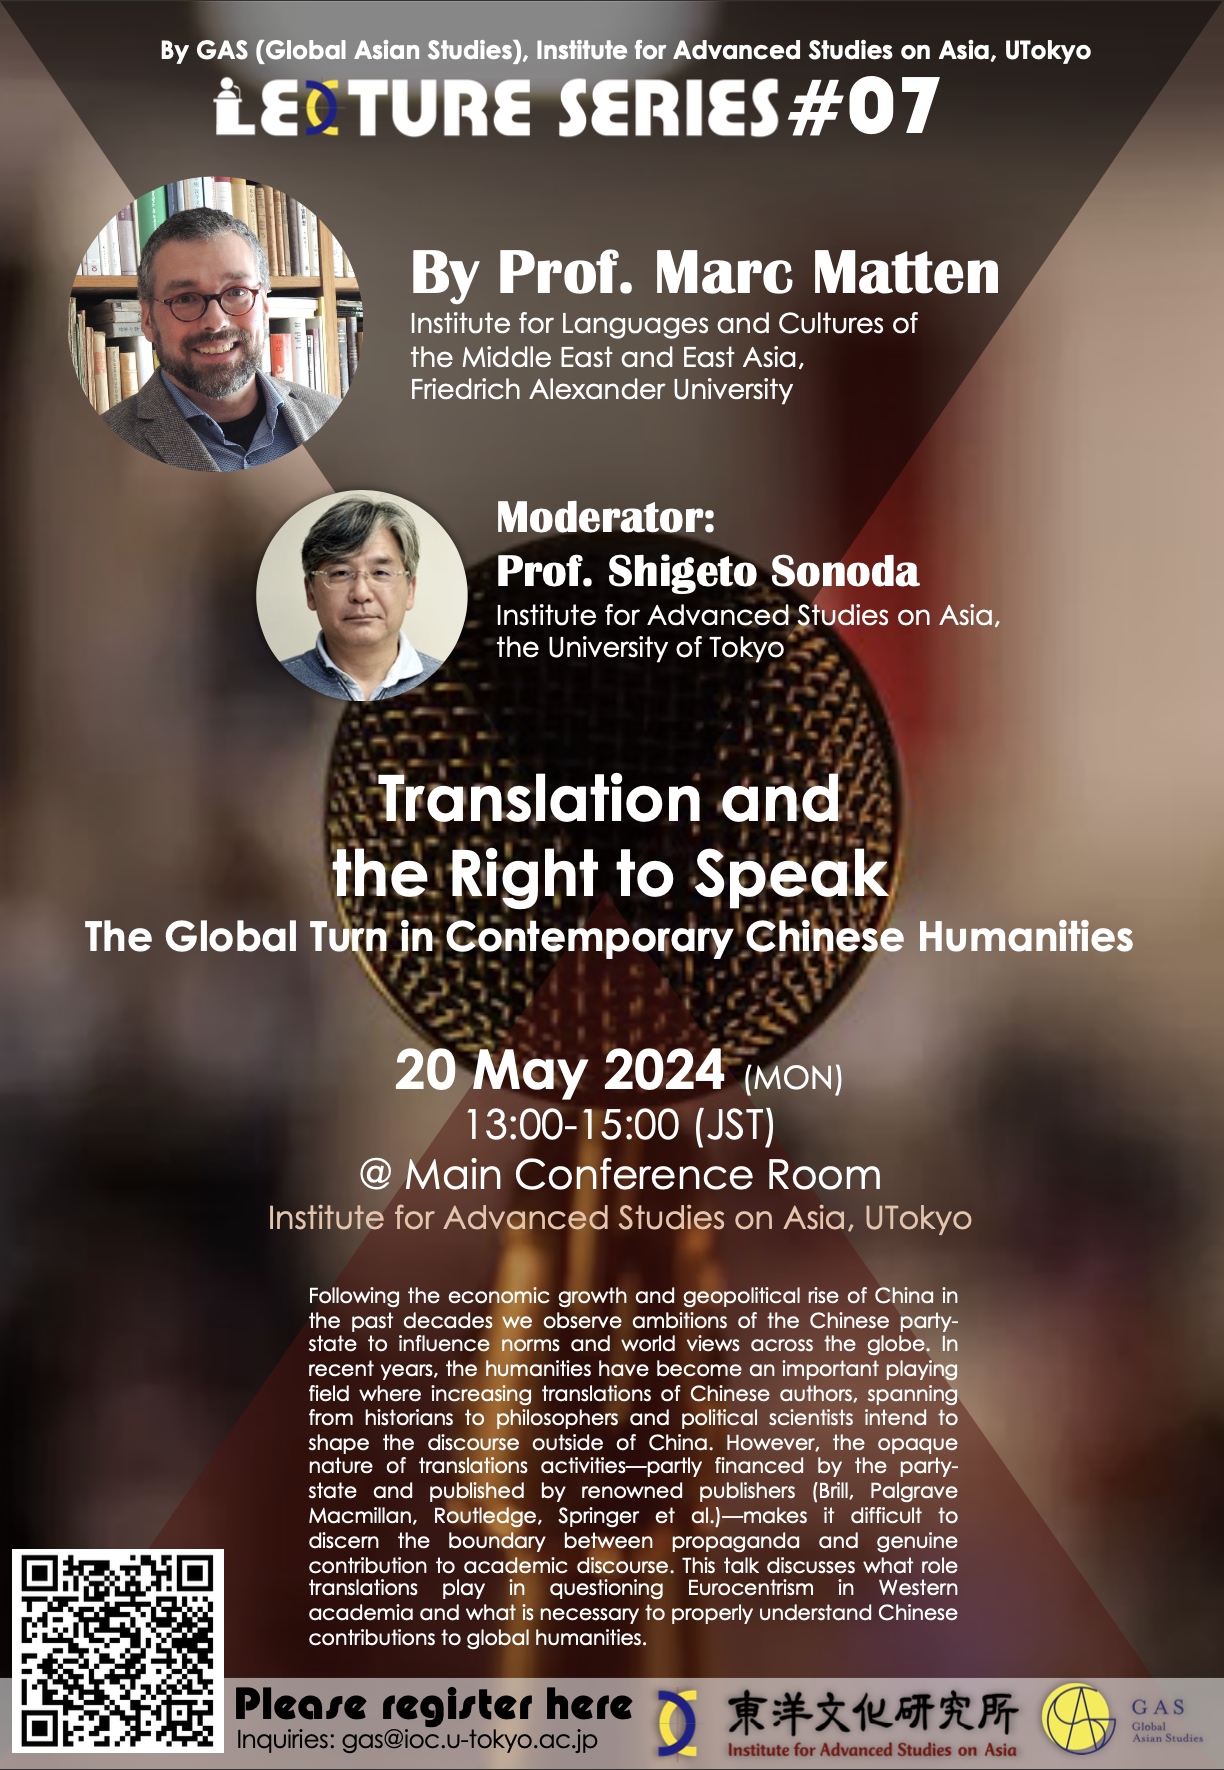 Translation and the Right to Speak: The Global Turn in Contemporary Chinese Humanities